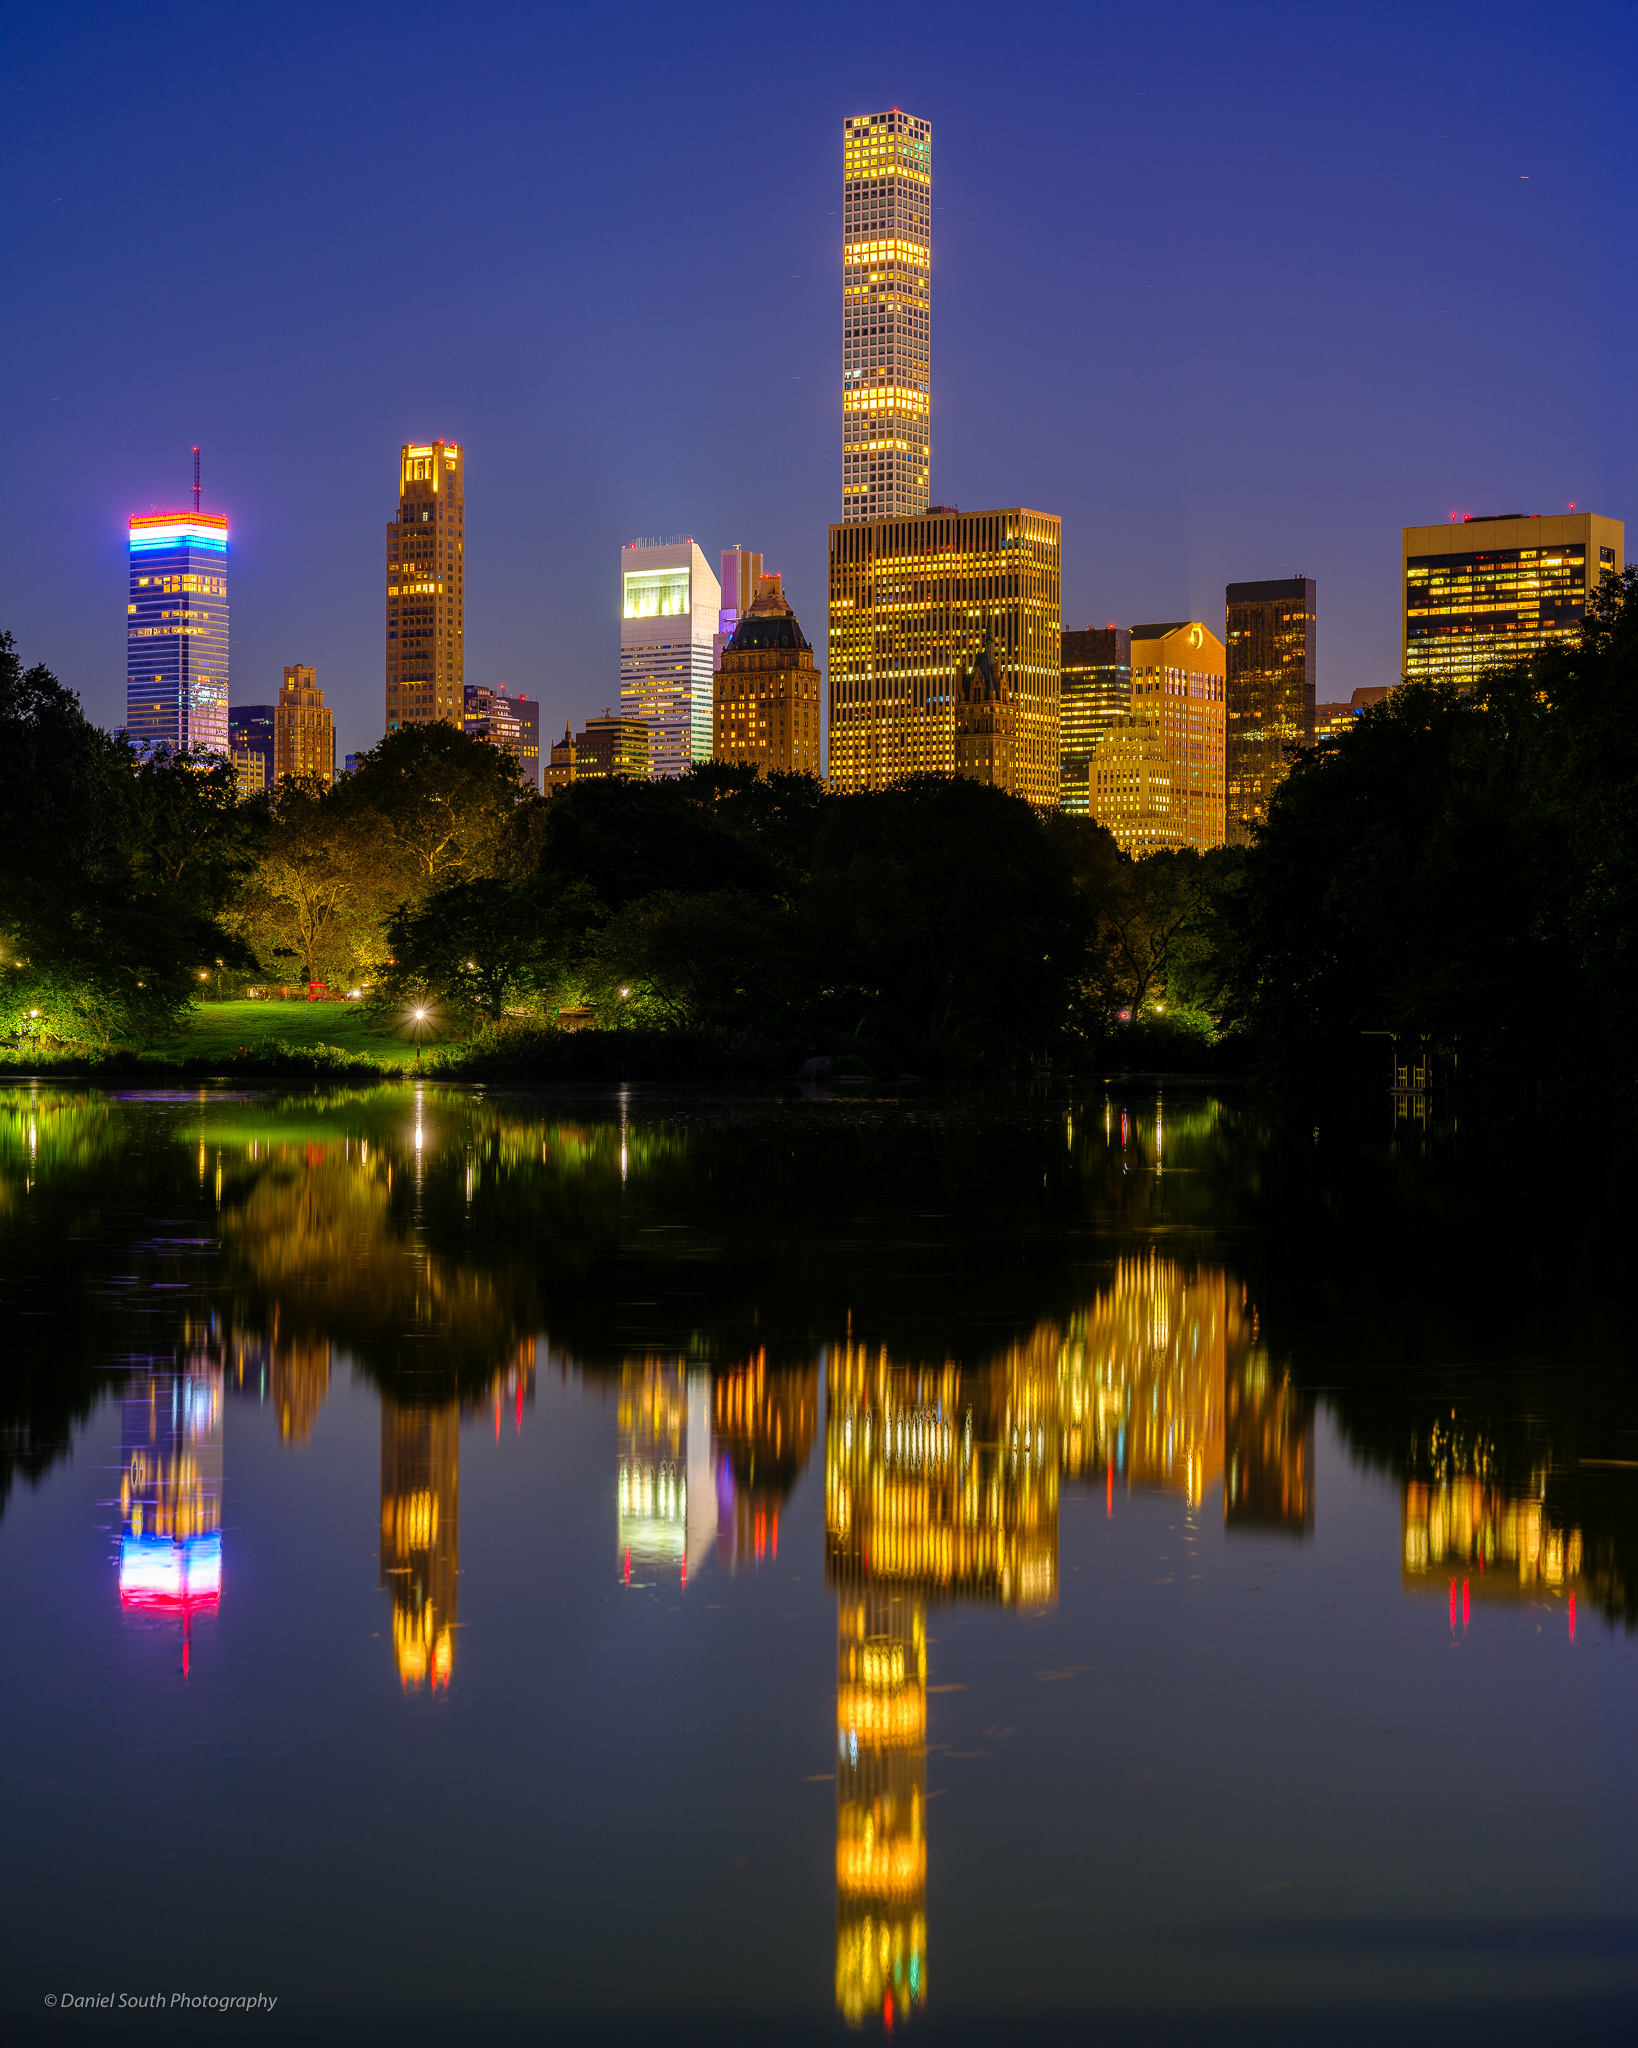 a photo of the new york skyline from central park at night